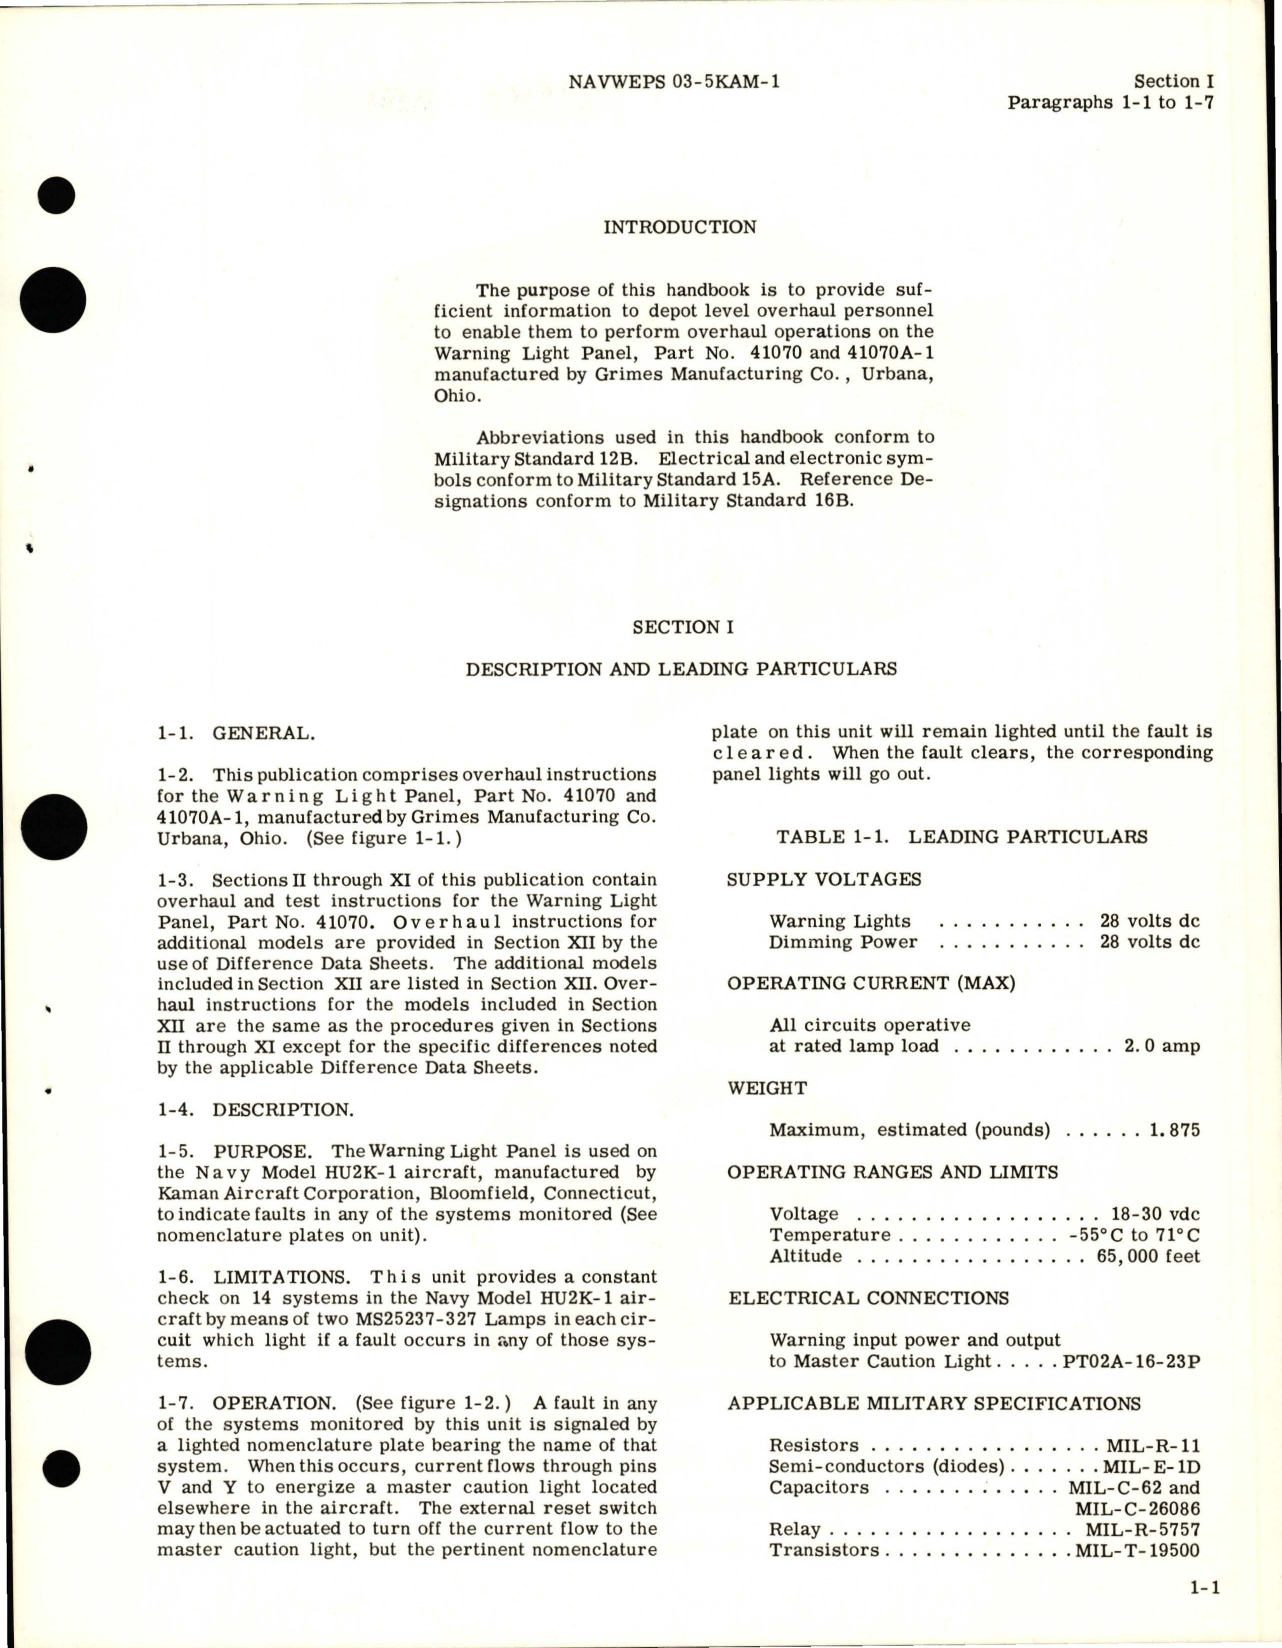 Sample page 5 from AirCorps Library document: Overhaul Instructions for Warning Light Panel - Parts 41070 and 41070A-1